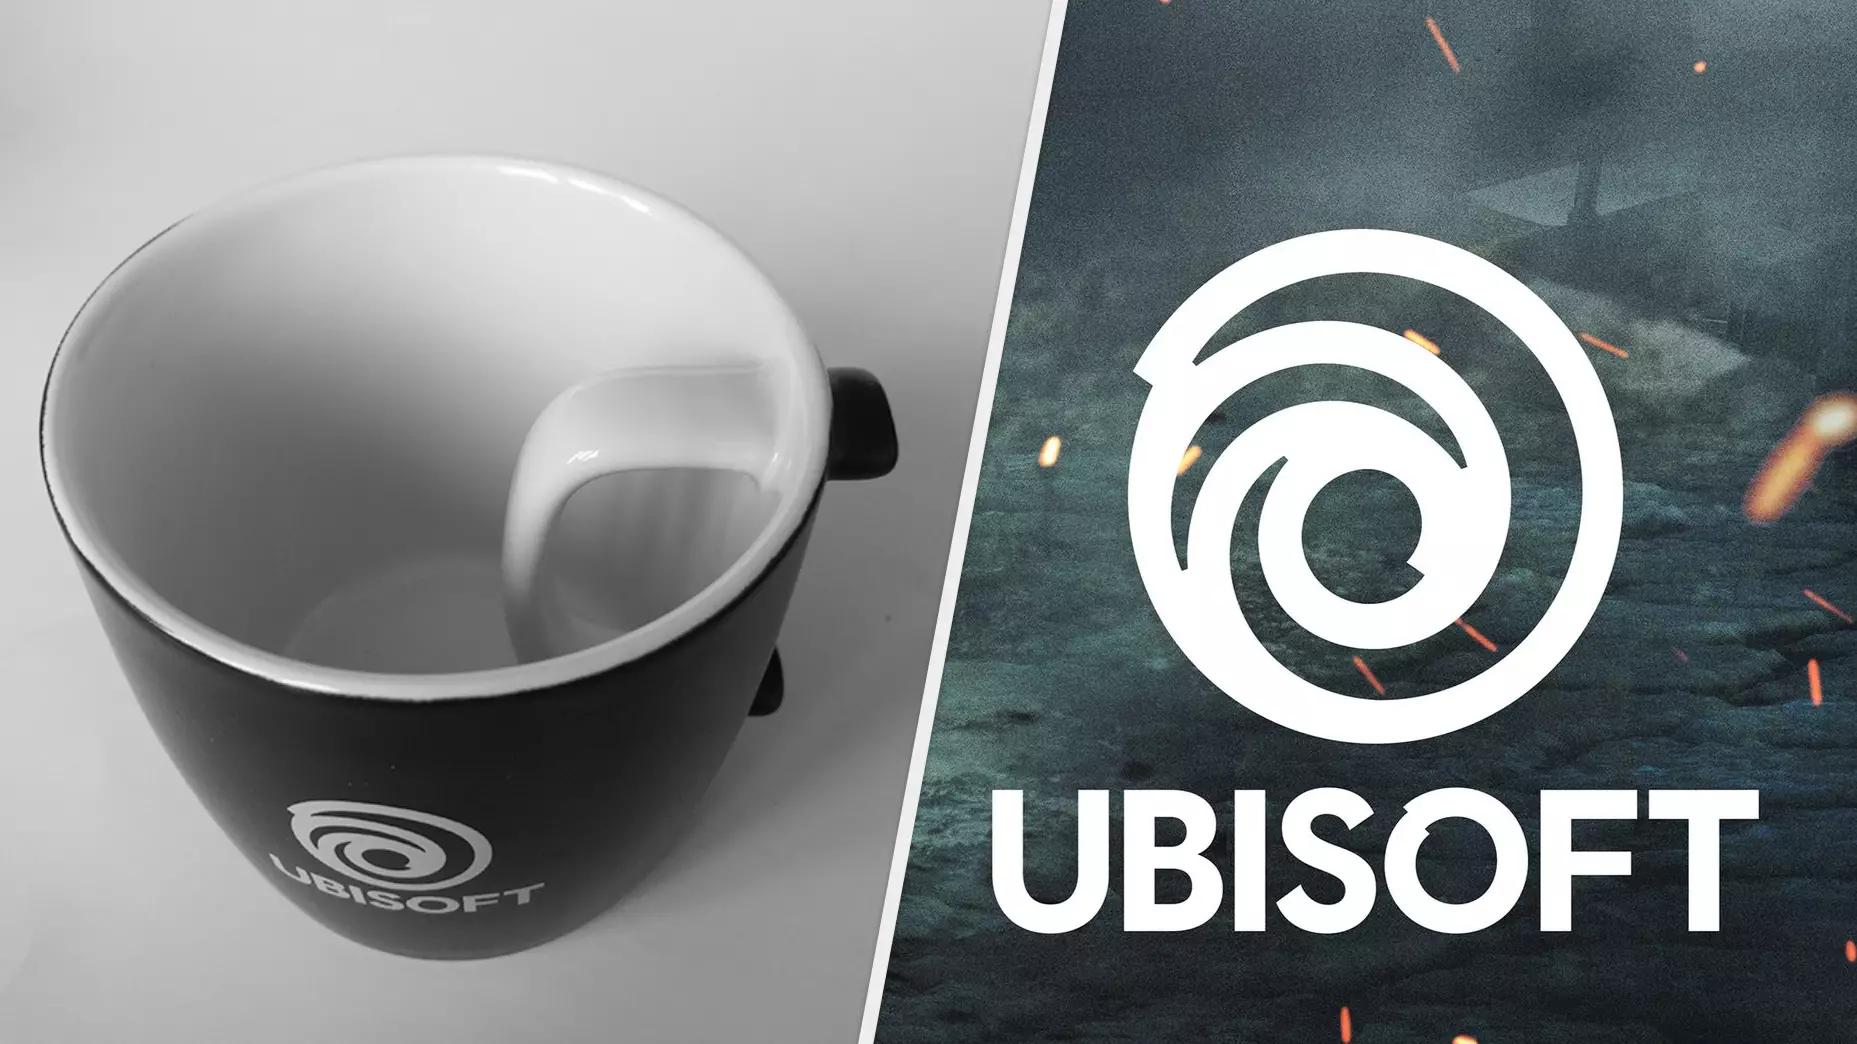 Ubisoft China 'Sorry' For Releasing Coffee Cup With Handle On The Inside